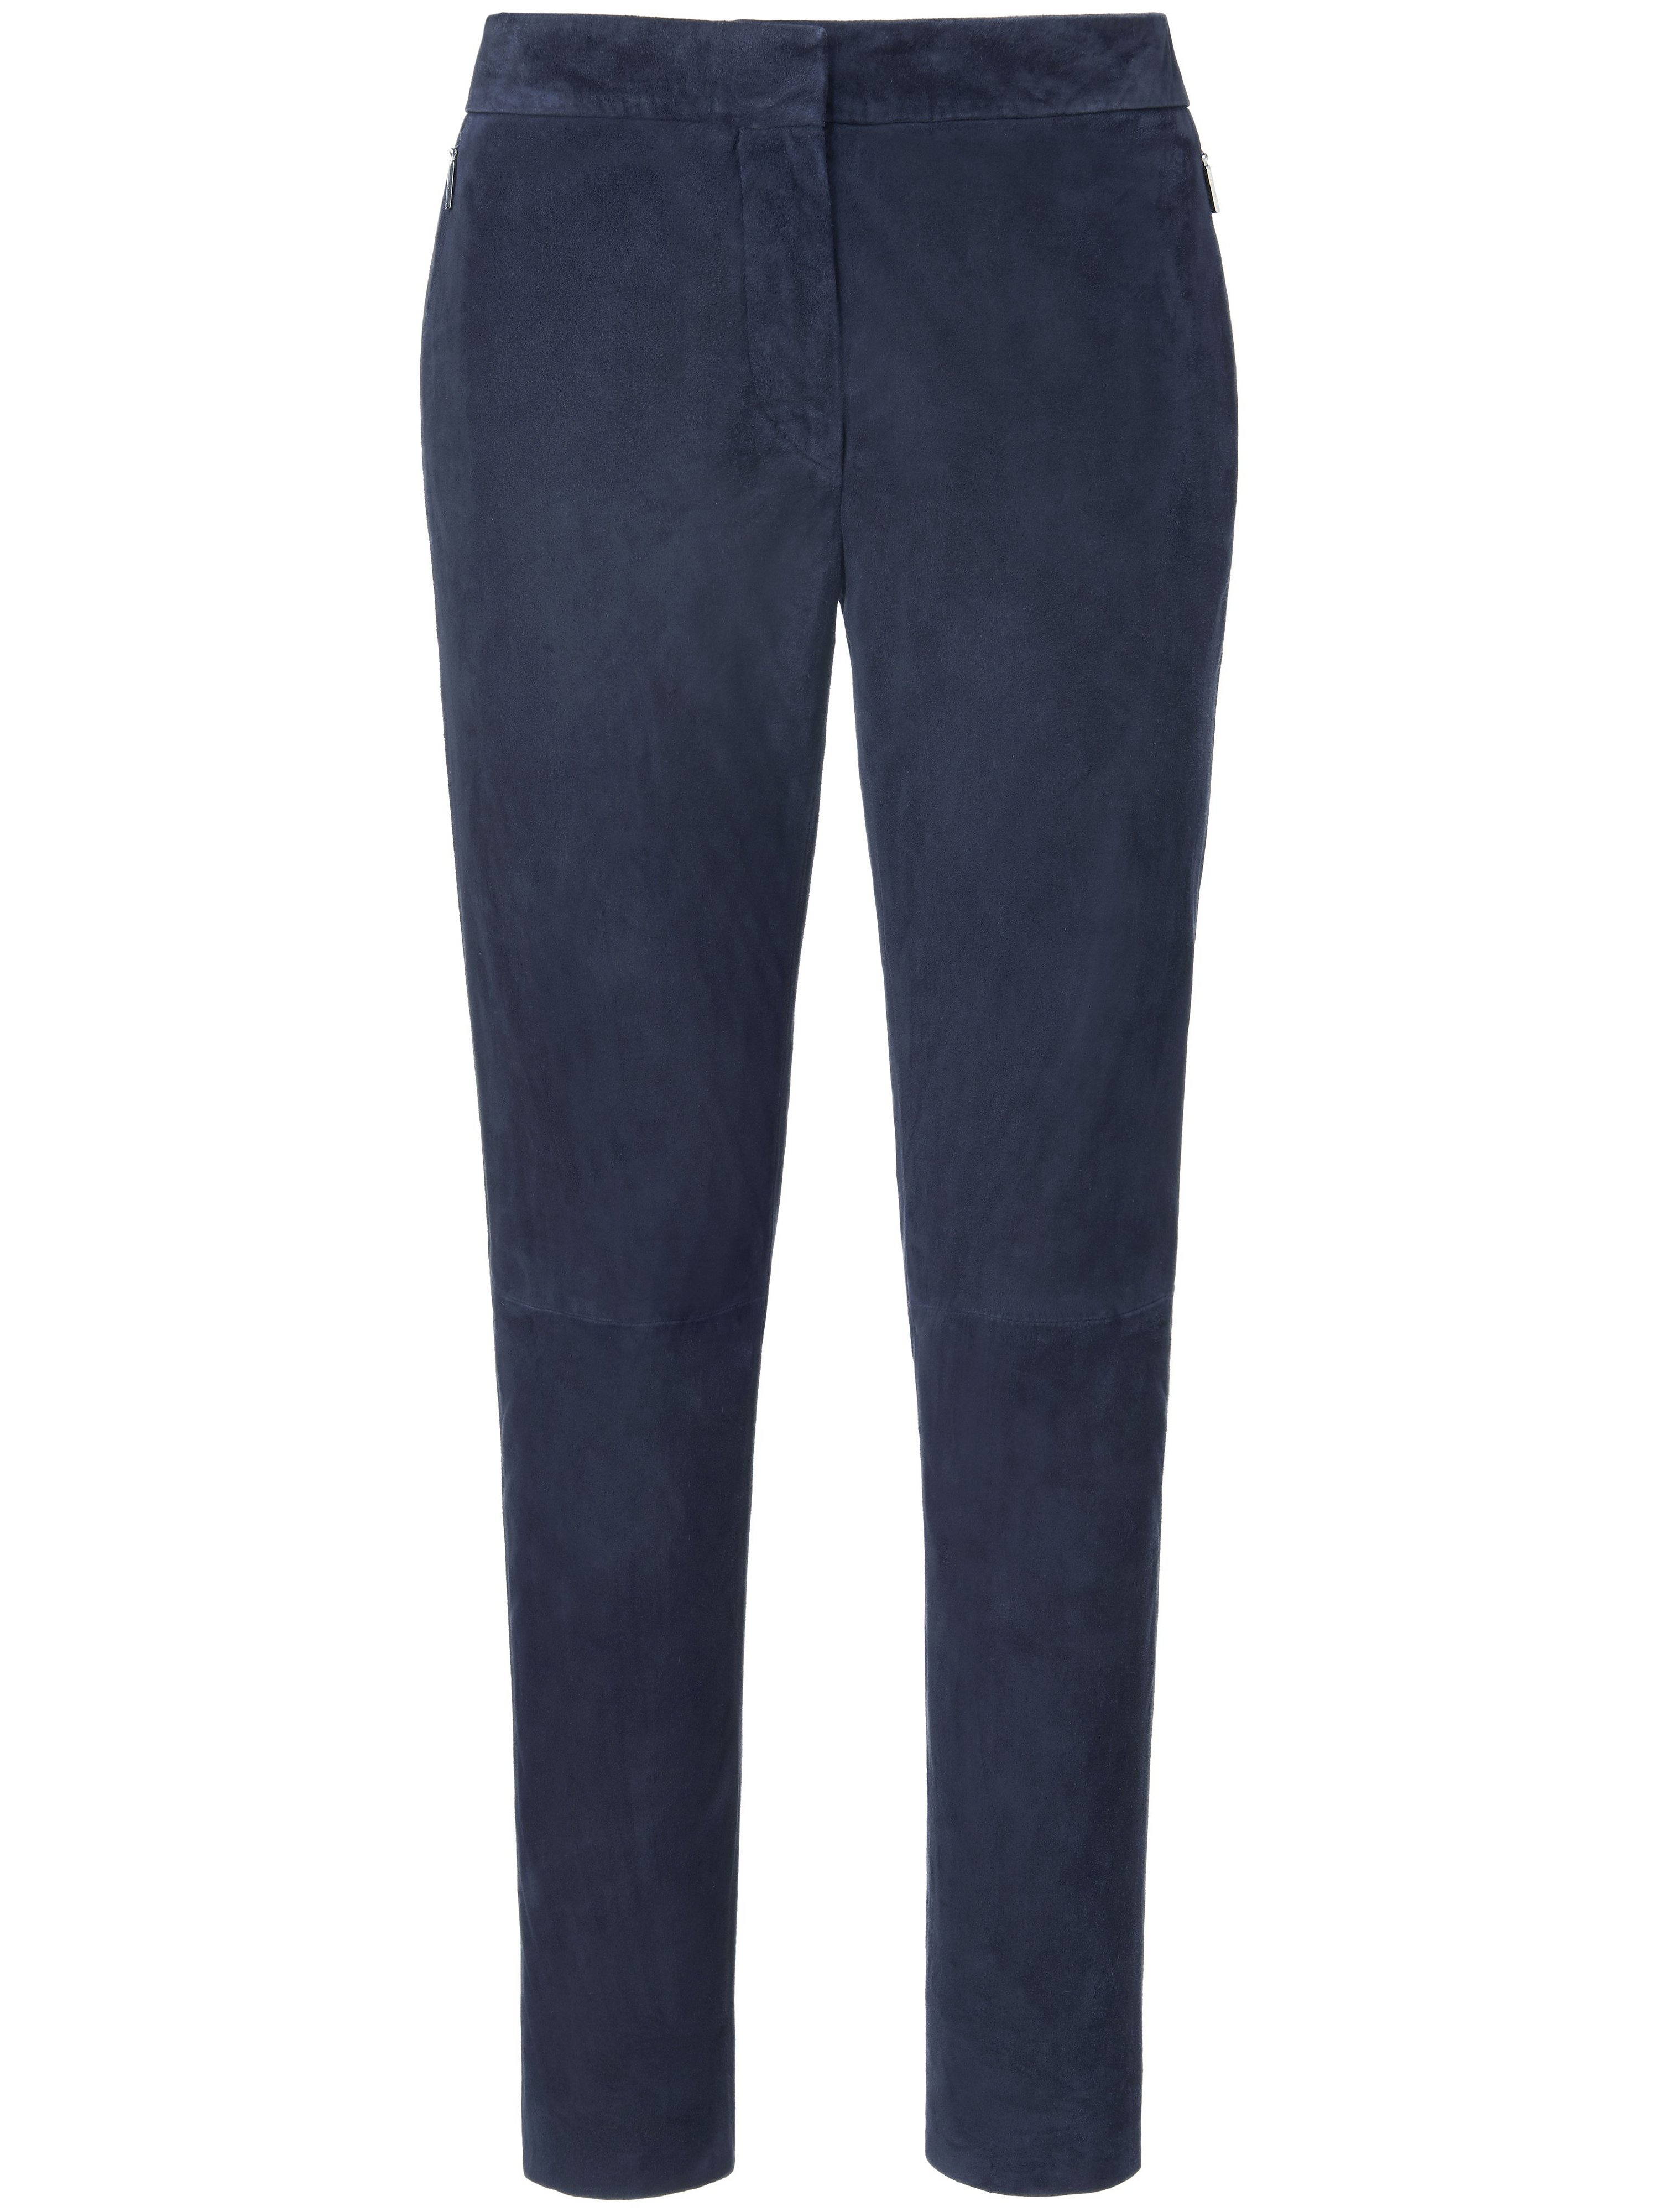 Ankle-length leather trousers Fadenmeister Berlin blue